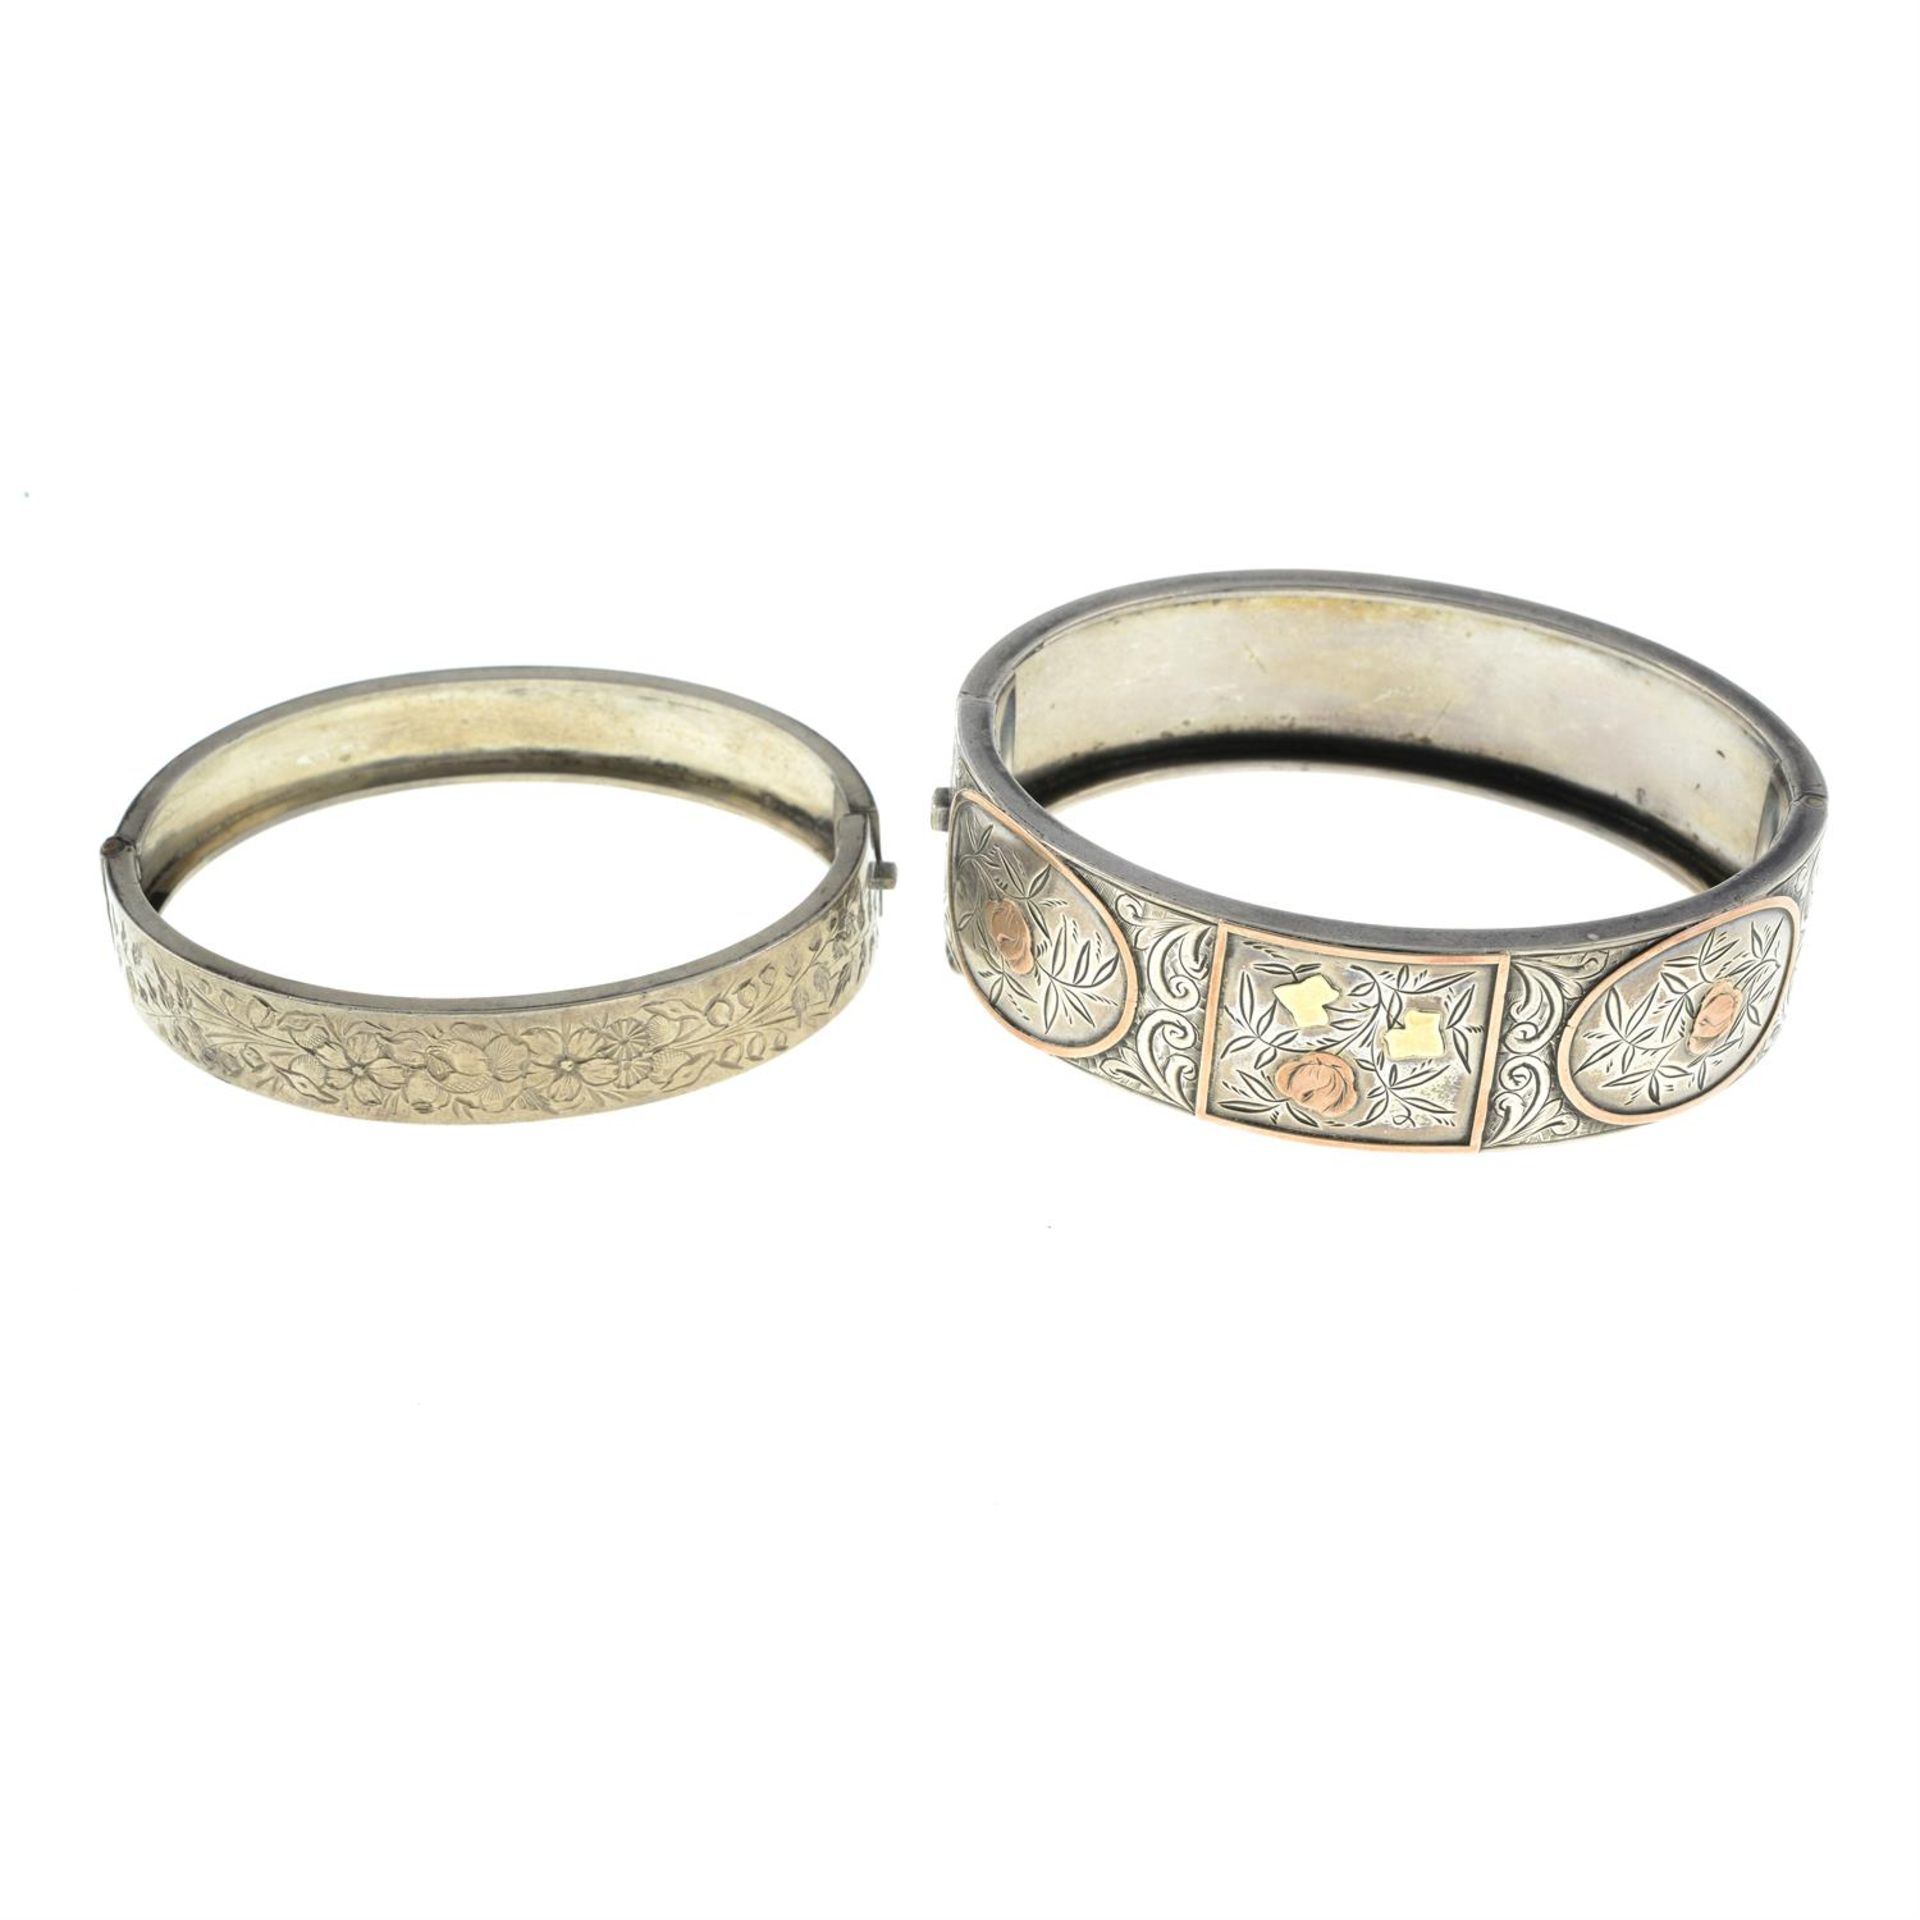 Two early 20th century silver hinged bangles.